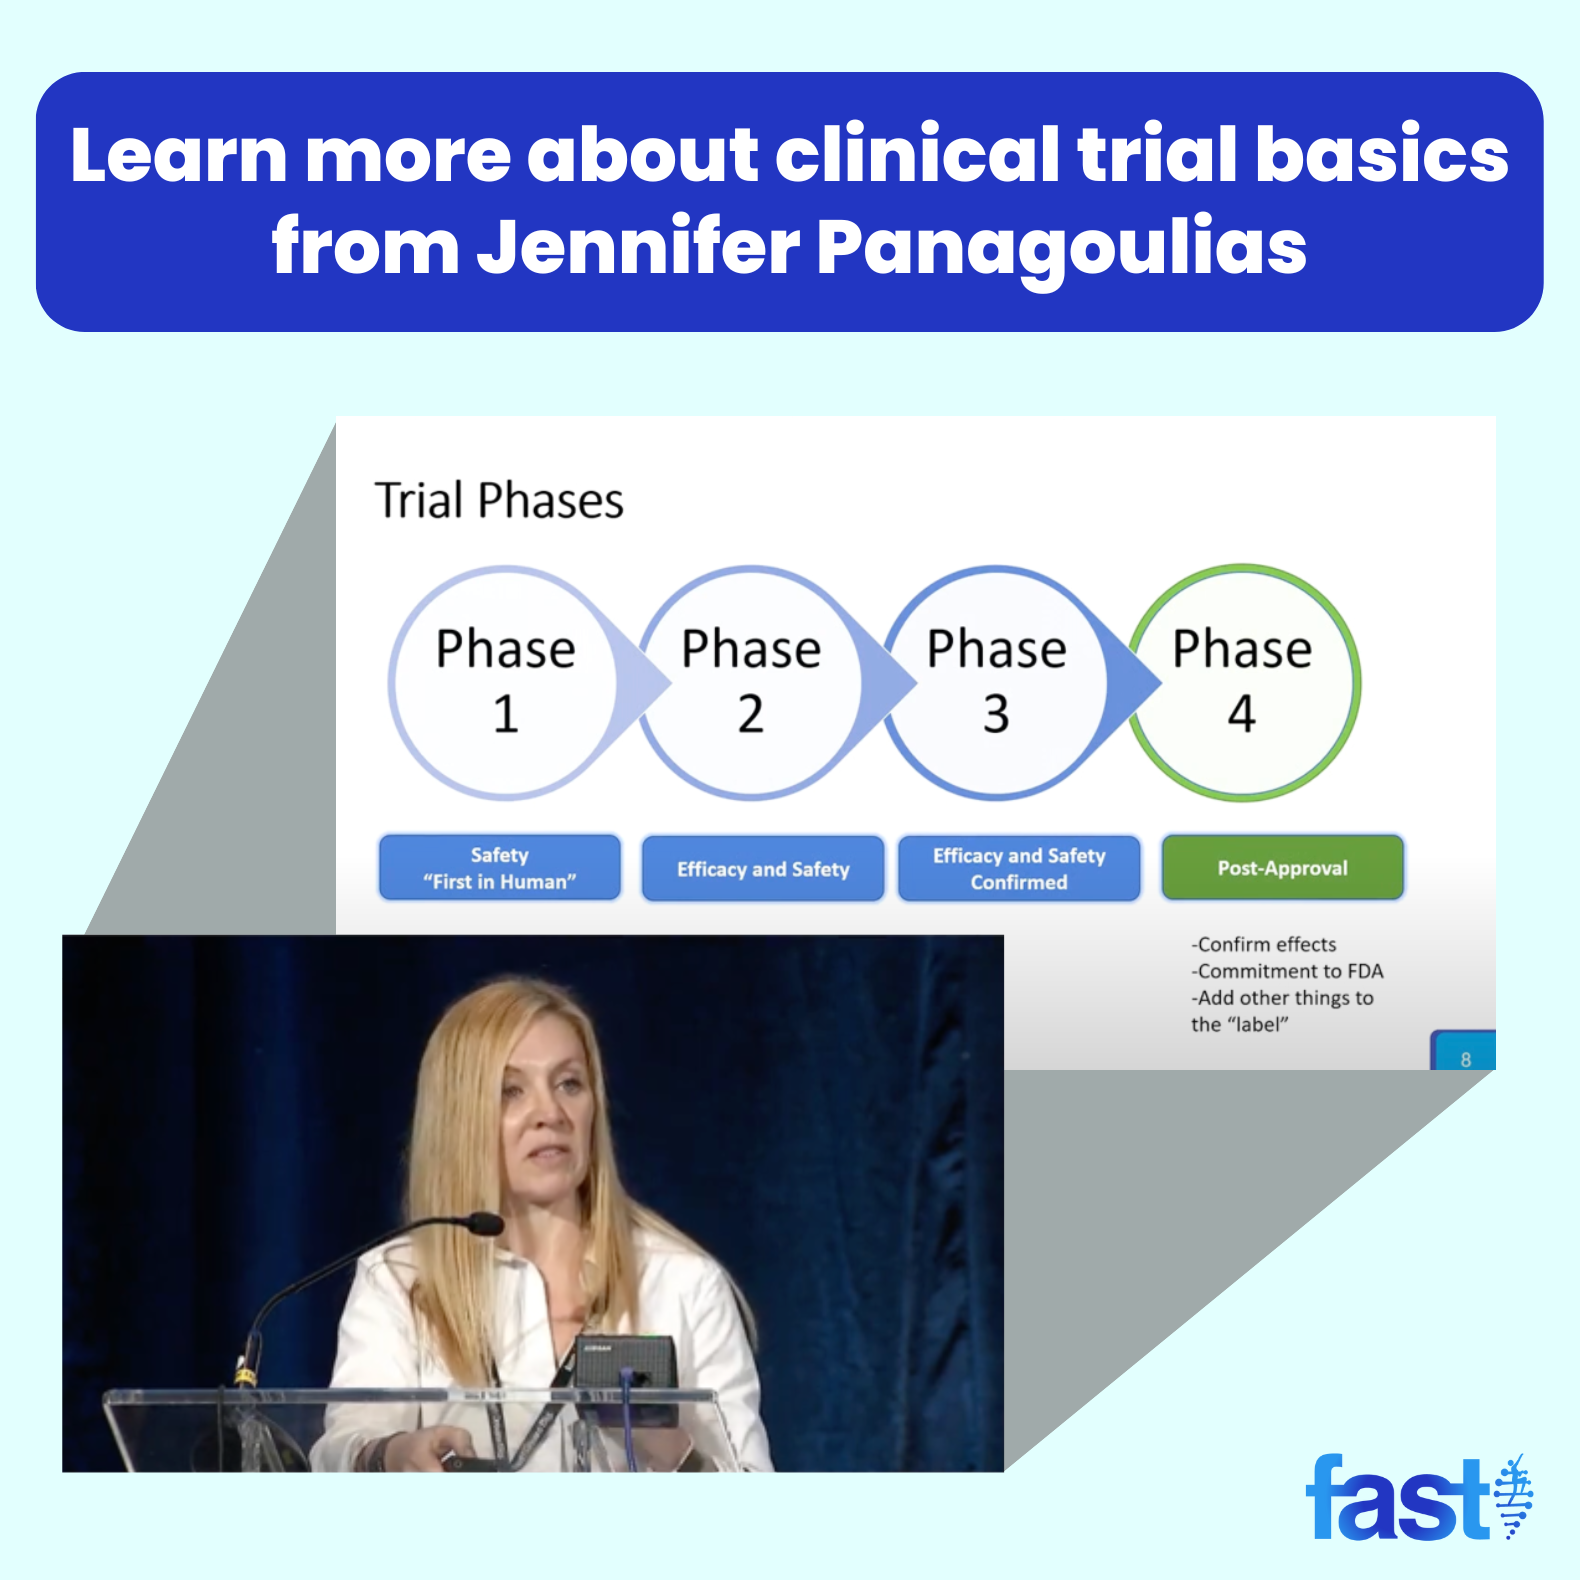 Learn more about clinical trial basics from Jennifer Panagoulias, with a screenshot of Jennifer speaking at the 2022 Global Science Summit and a slide from her presentation about trial phases